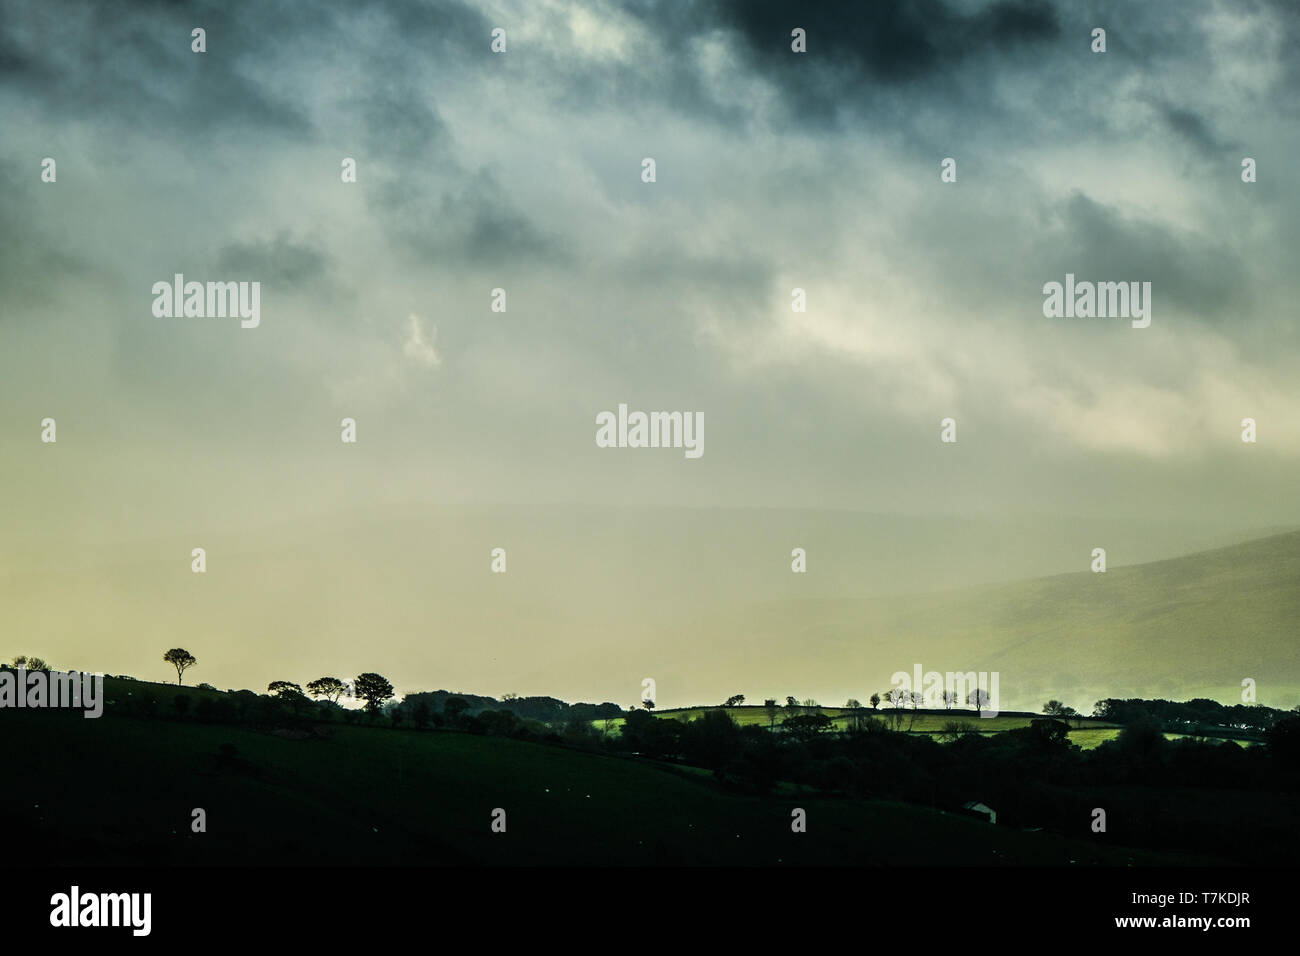 Ceredigion Wales UK, Wednesday 08 May 2019 UK Weather: A grey, cloudy and cold start to the day in Ceredigion Wales, as wet weather unsettled conditions roll in over the hills of this rural welsh county photo Credit: keith morris/Alamy Live News Stock Photo